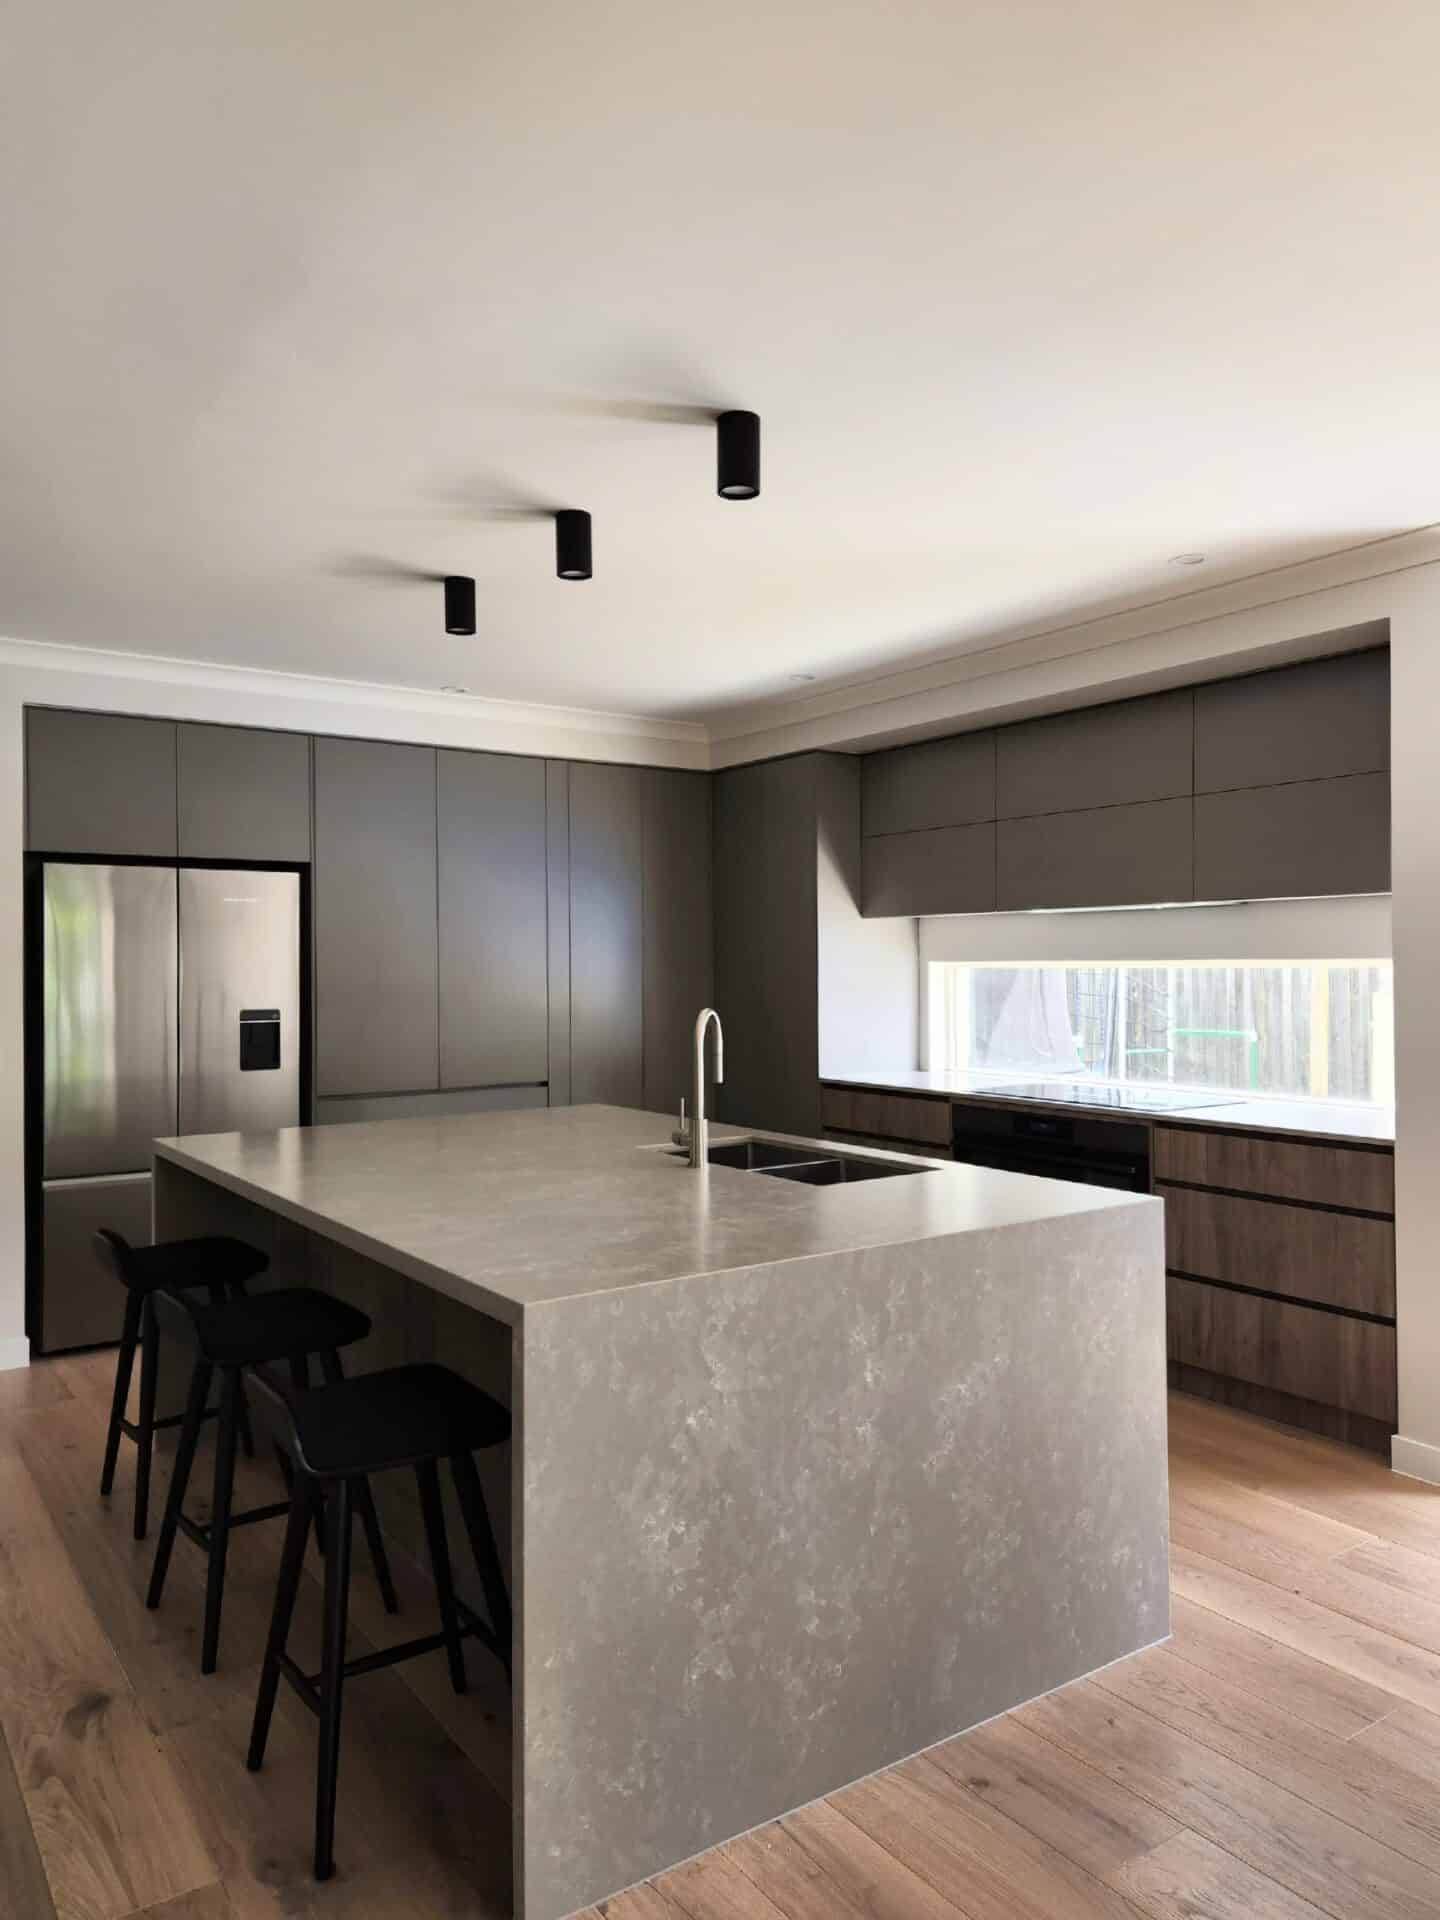 modern kitchen with a gray counter, sink and high stools.